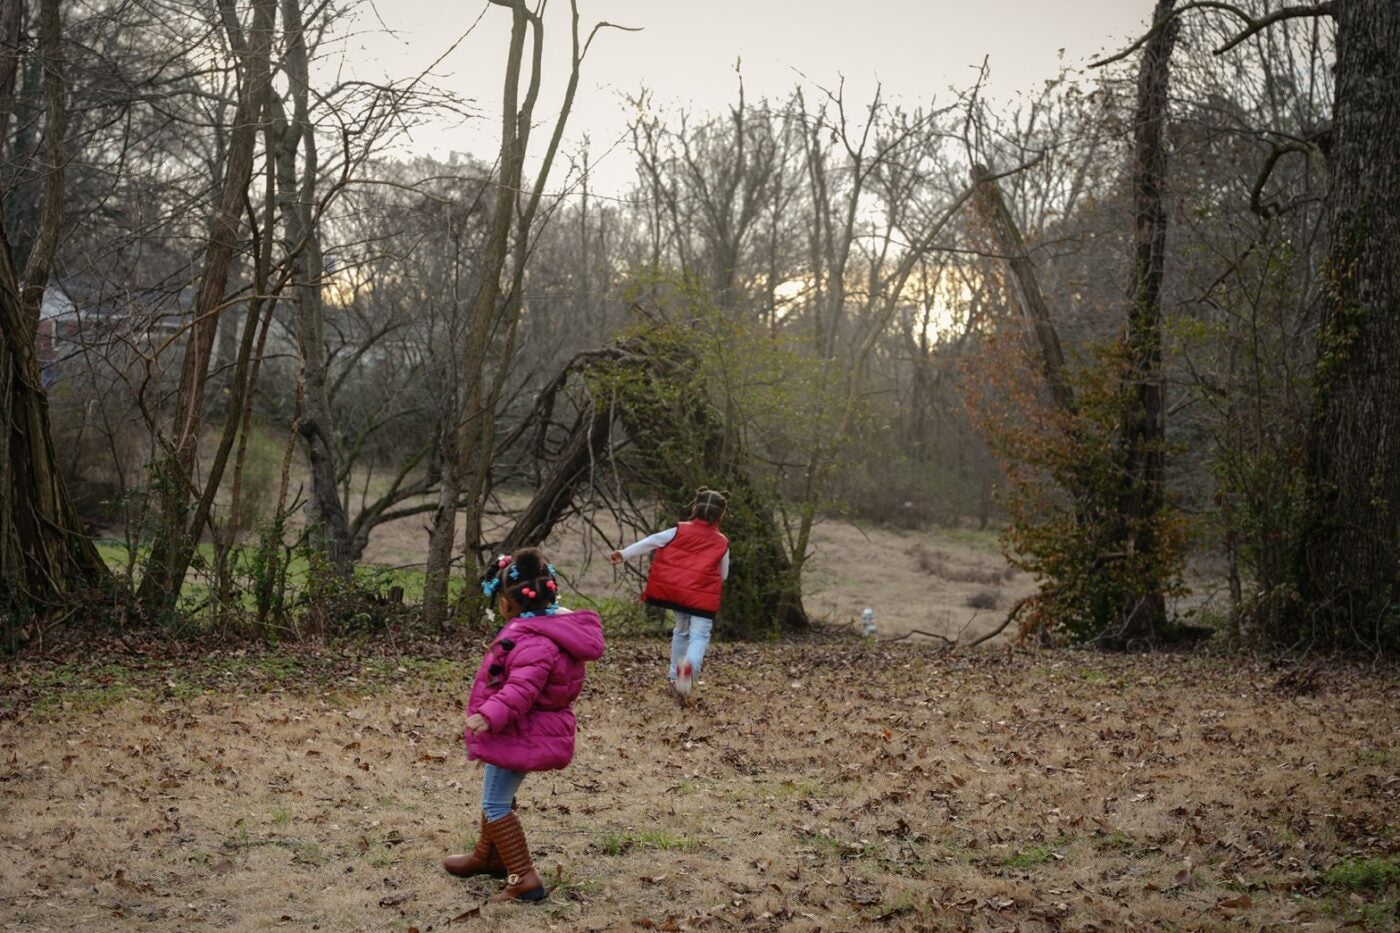 Two young black children play in their rural backyard near Memphis, Tenessee. One child wears a bright pink coat and jeans, the other a bright red vest and jeans.